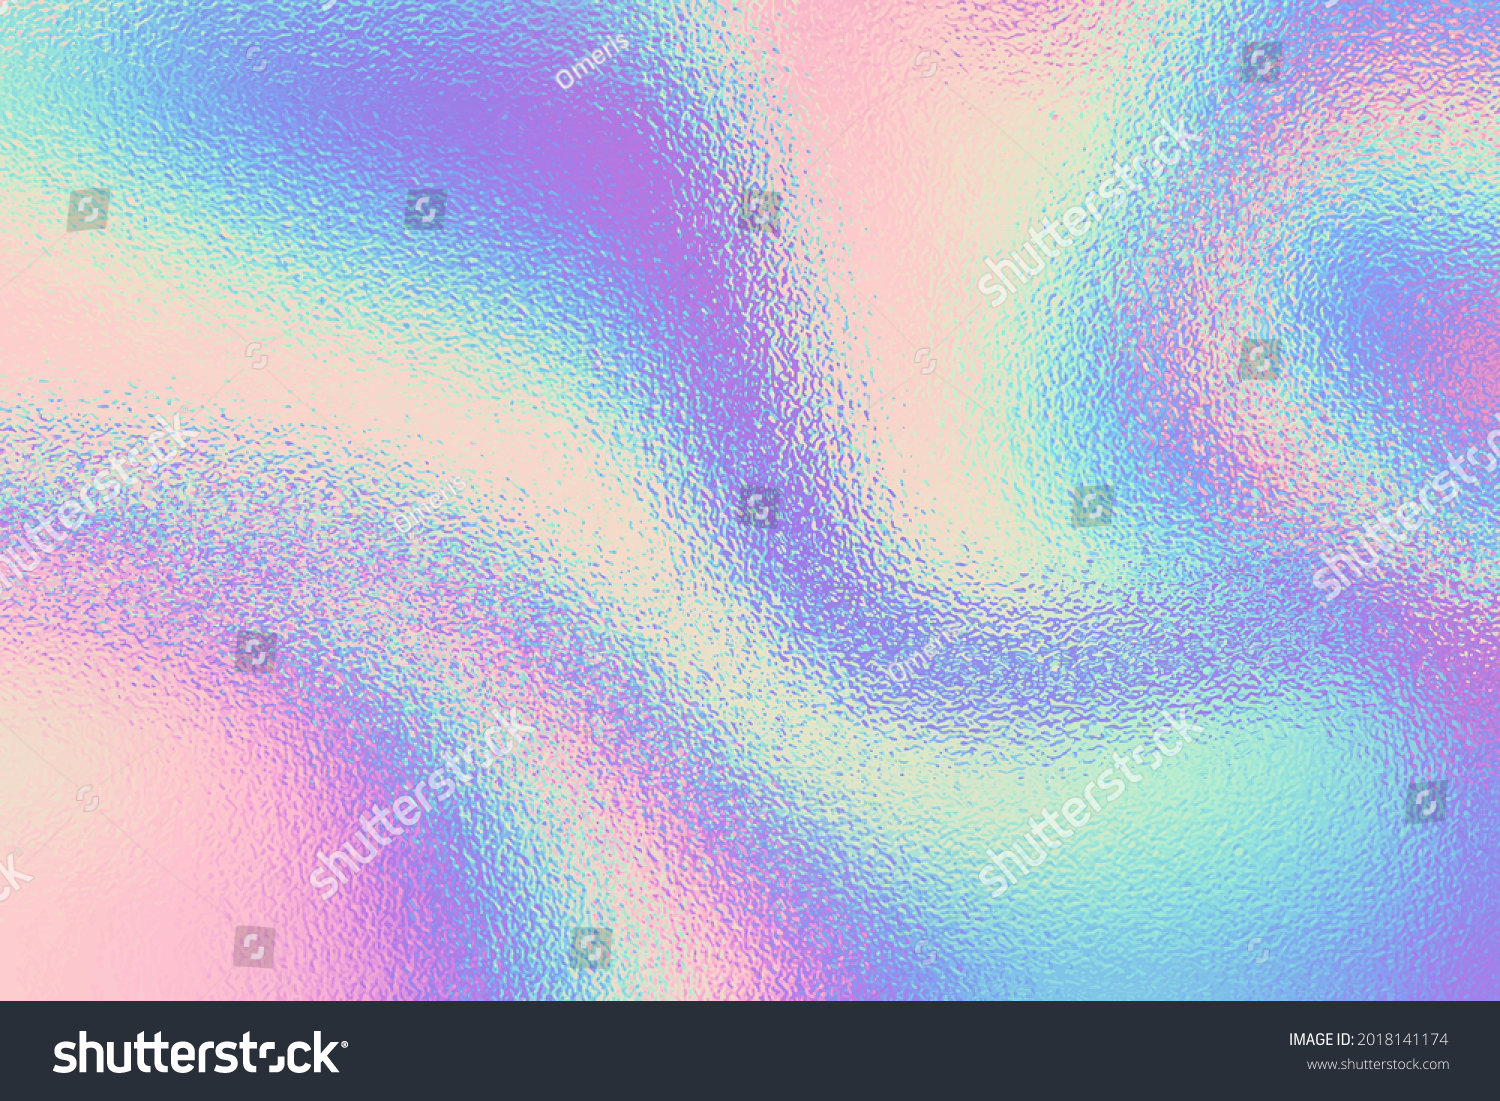 Iridescent texture. Holographic background. Hologram gradient
neon color. Foil effect. Rainbow graphic. Chrome cosmic design for prints. Holography pattern. Pearlescent ombre. Pastel patern. Vector #2018141174